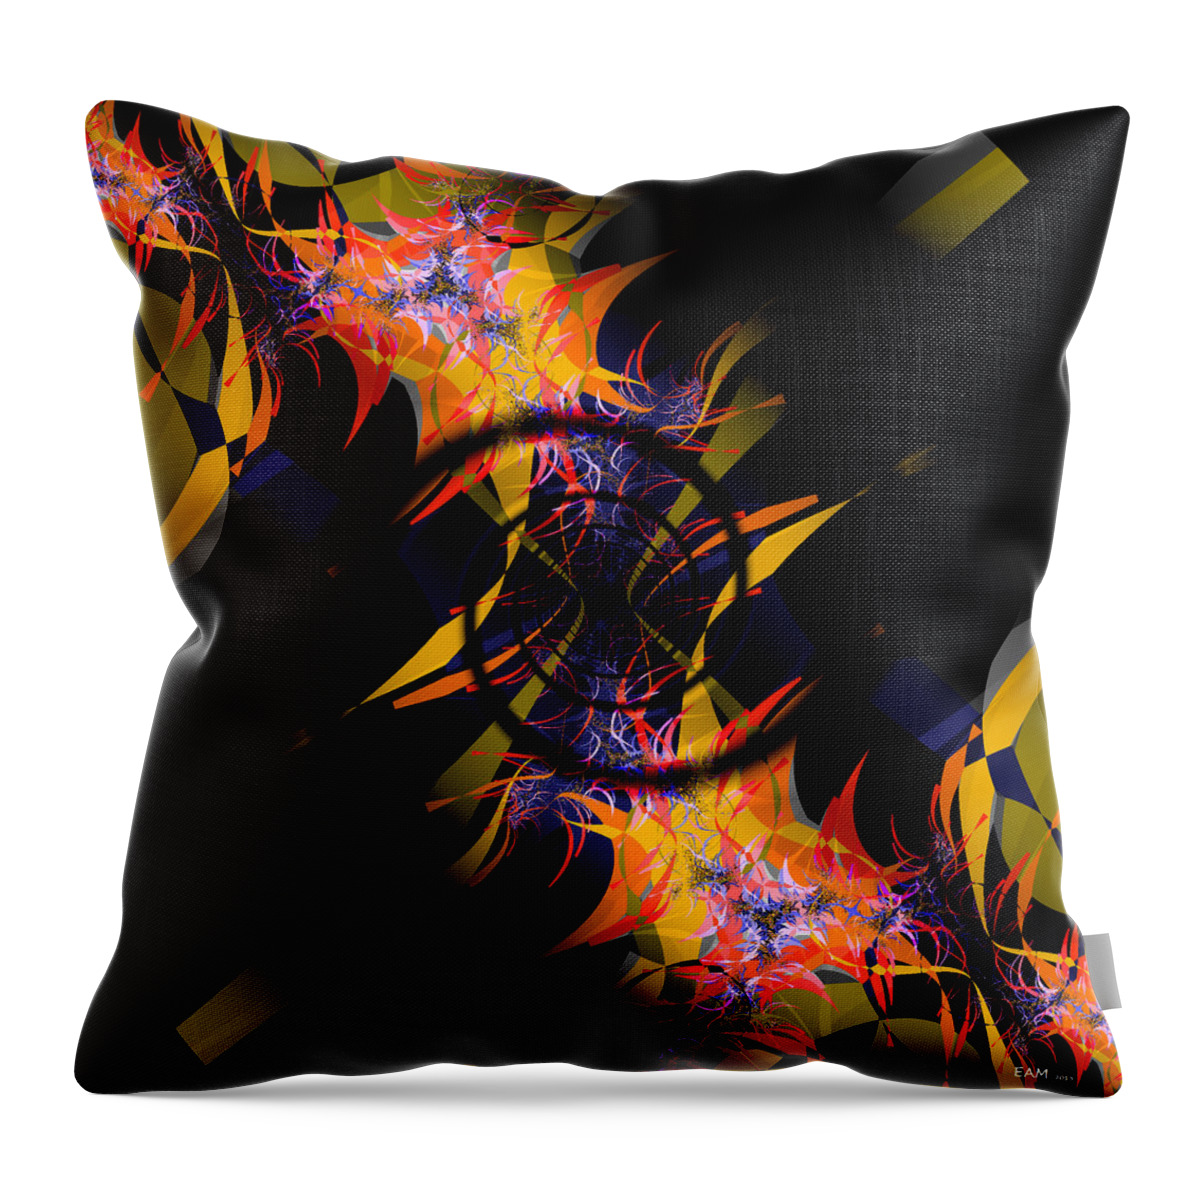 Fractal Art Throw Pillow featuring the digital art Spiral of Burning Desires by Elizabeth McTaggart